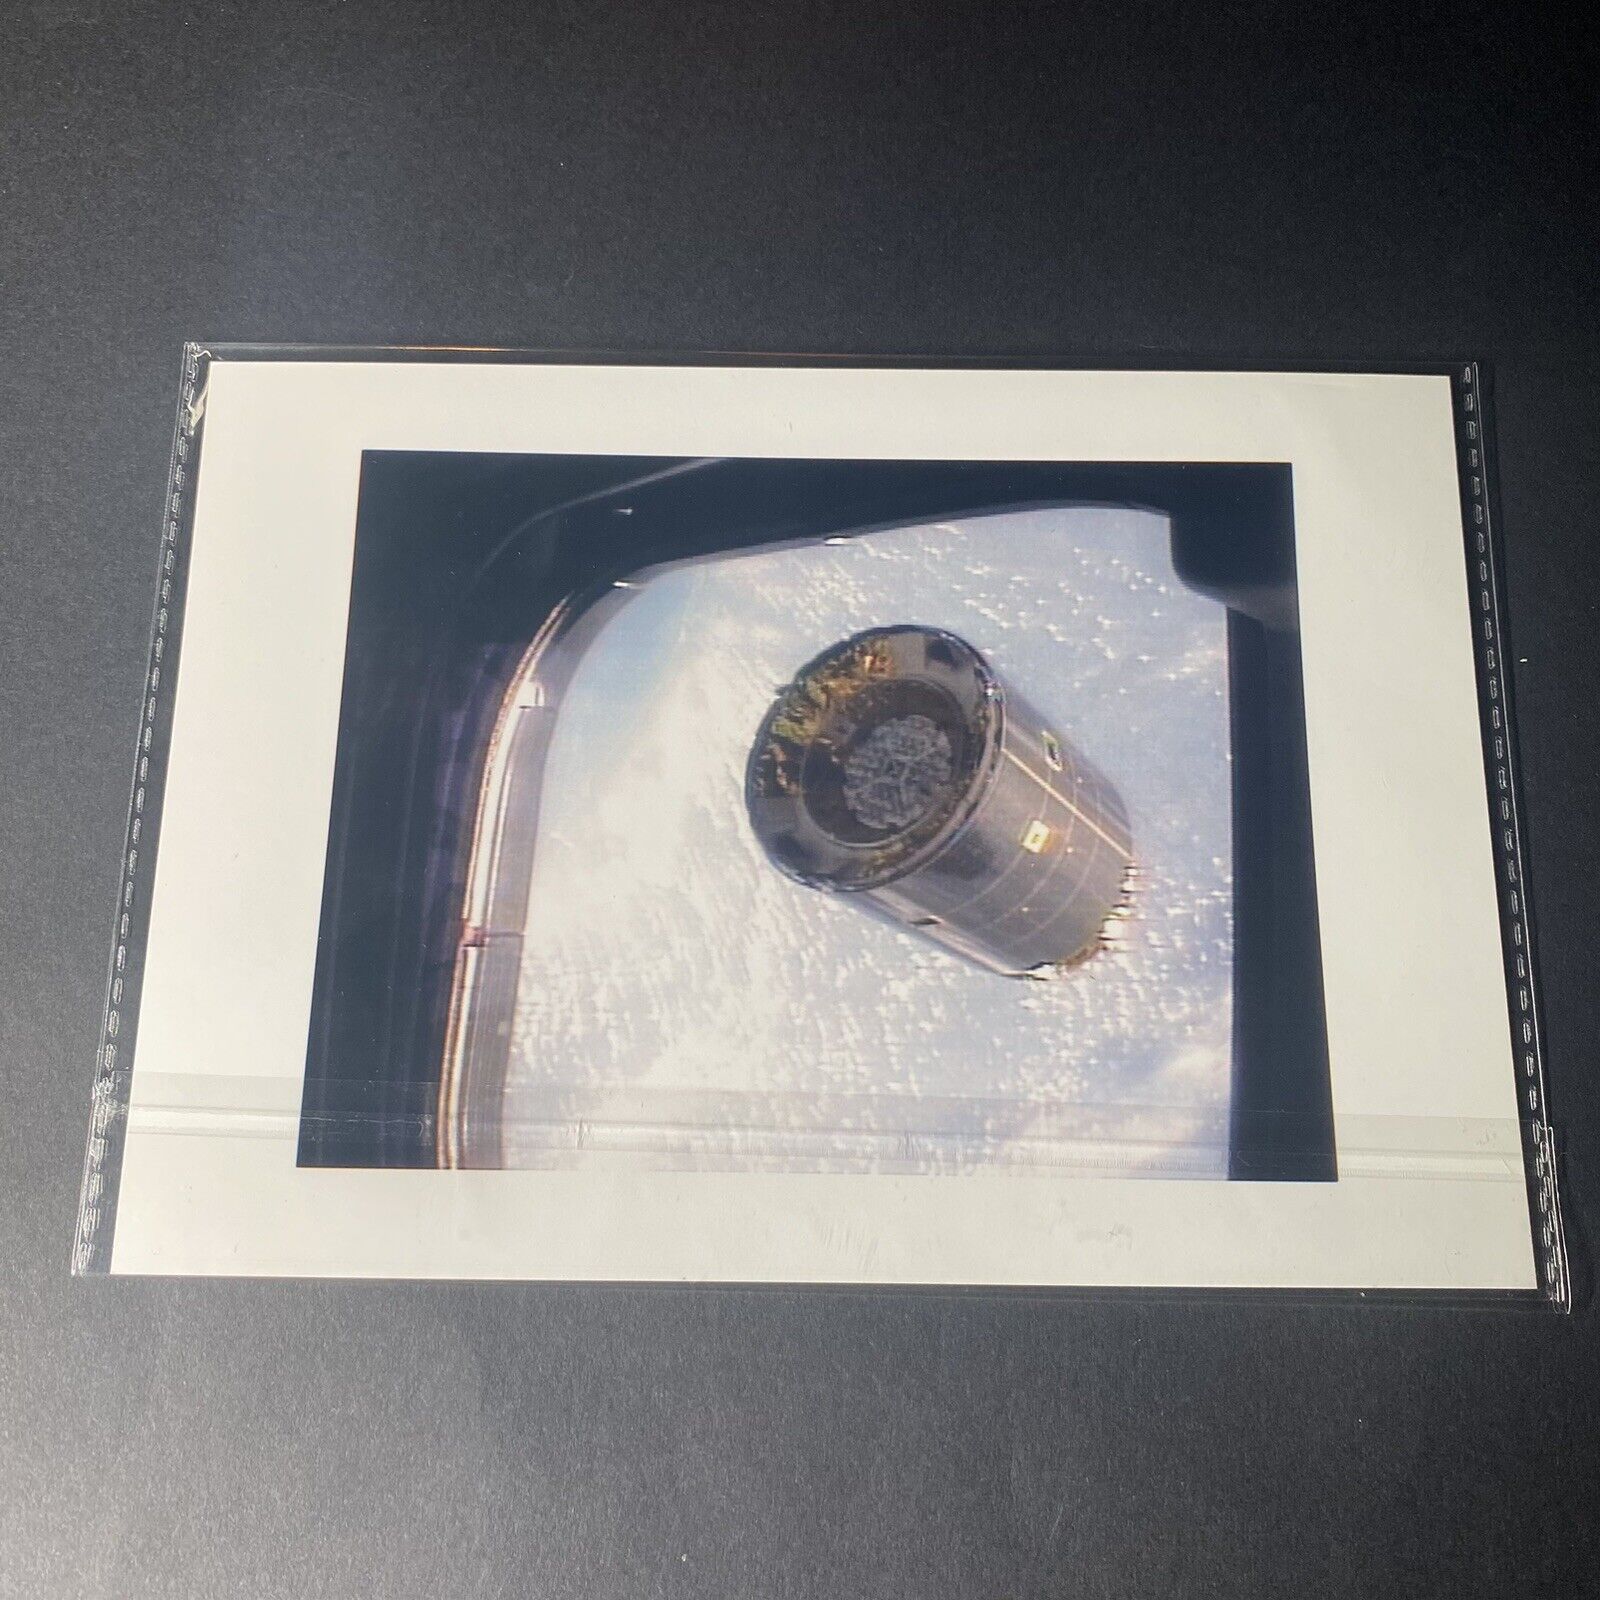 Official NASA Photo 1992 STS-49 Intelsat VI Satellite from Space Shuttle Window